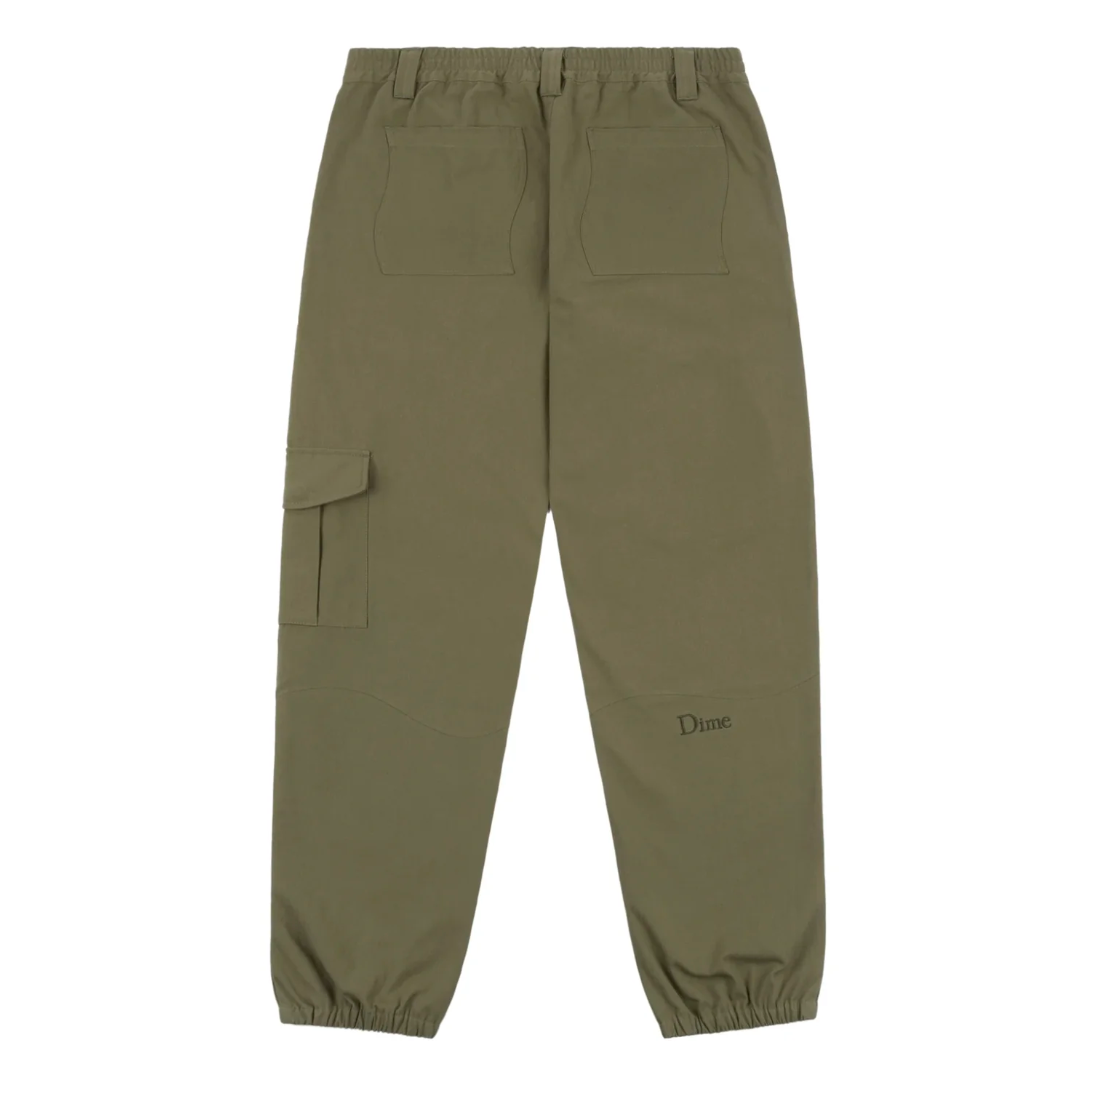 【Dime】Military I Know Pants - Army Green